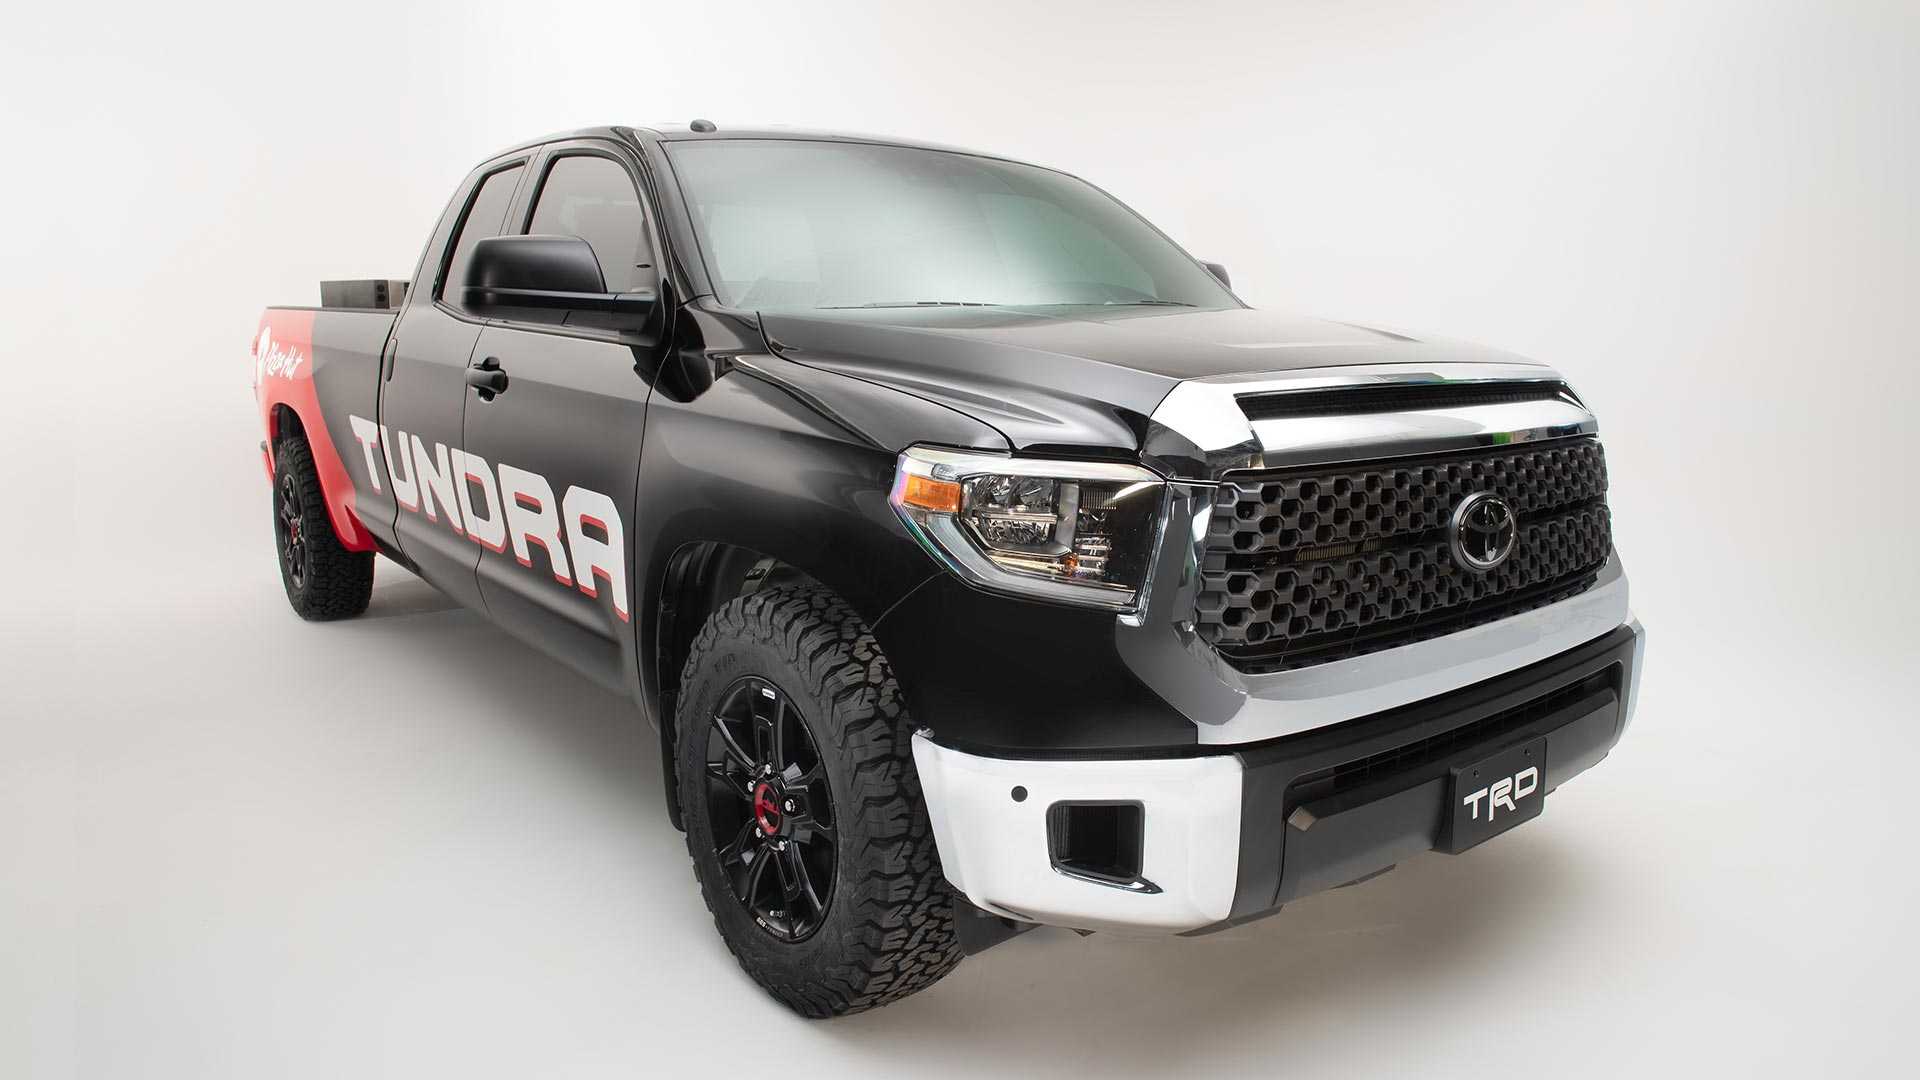 SEMA 2018: Toyota's Hydrogen-Powered Tundra Is A Truck With Pizza